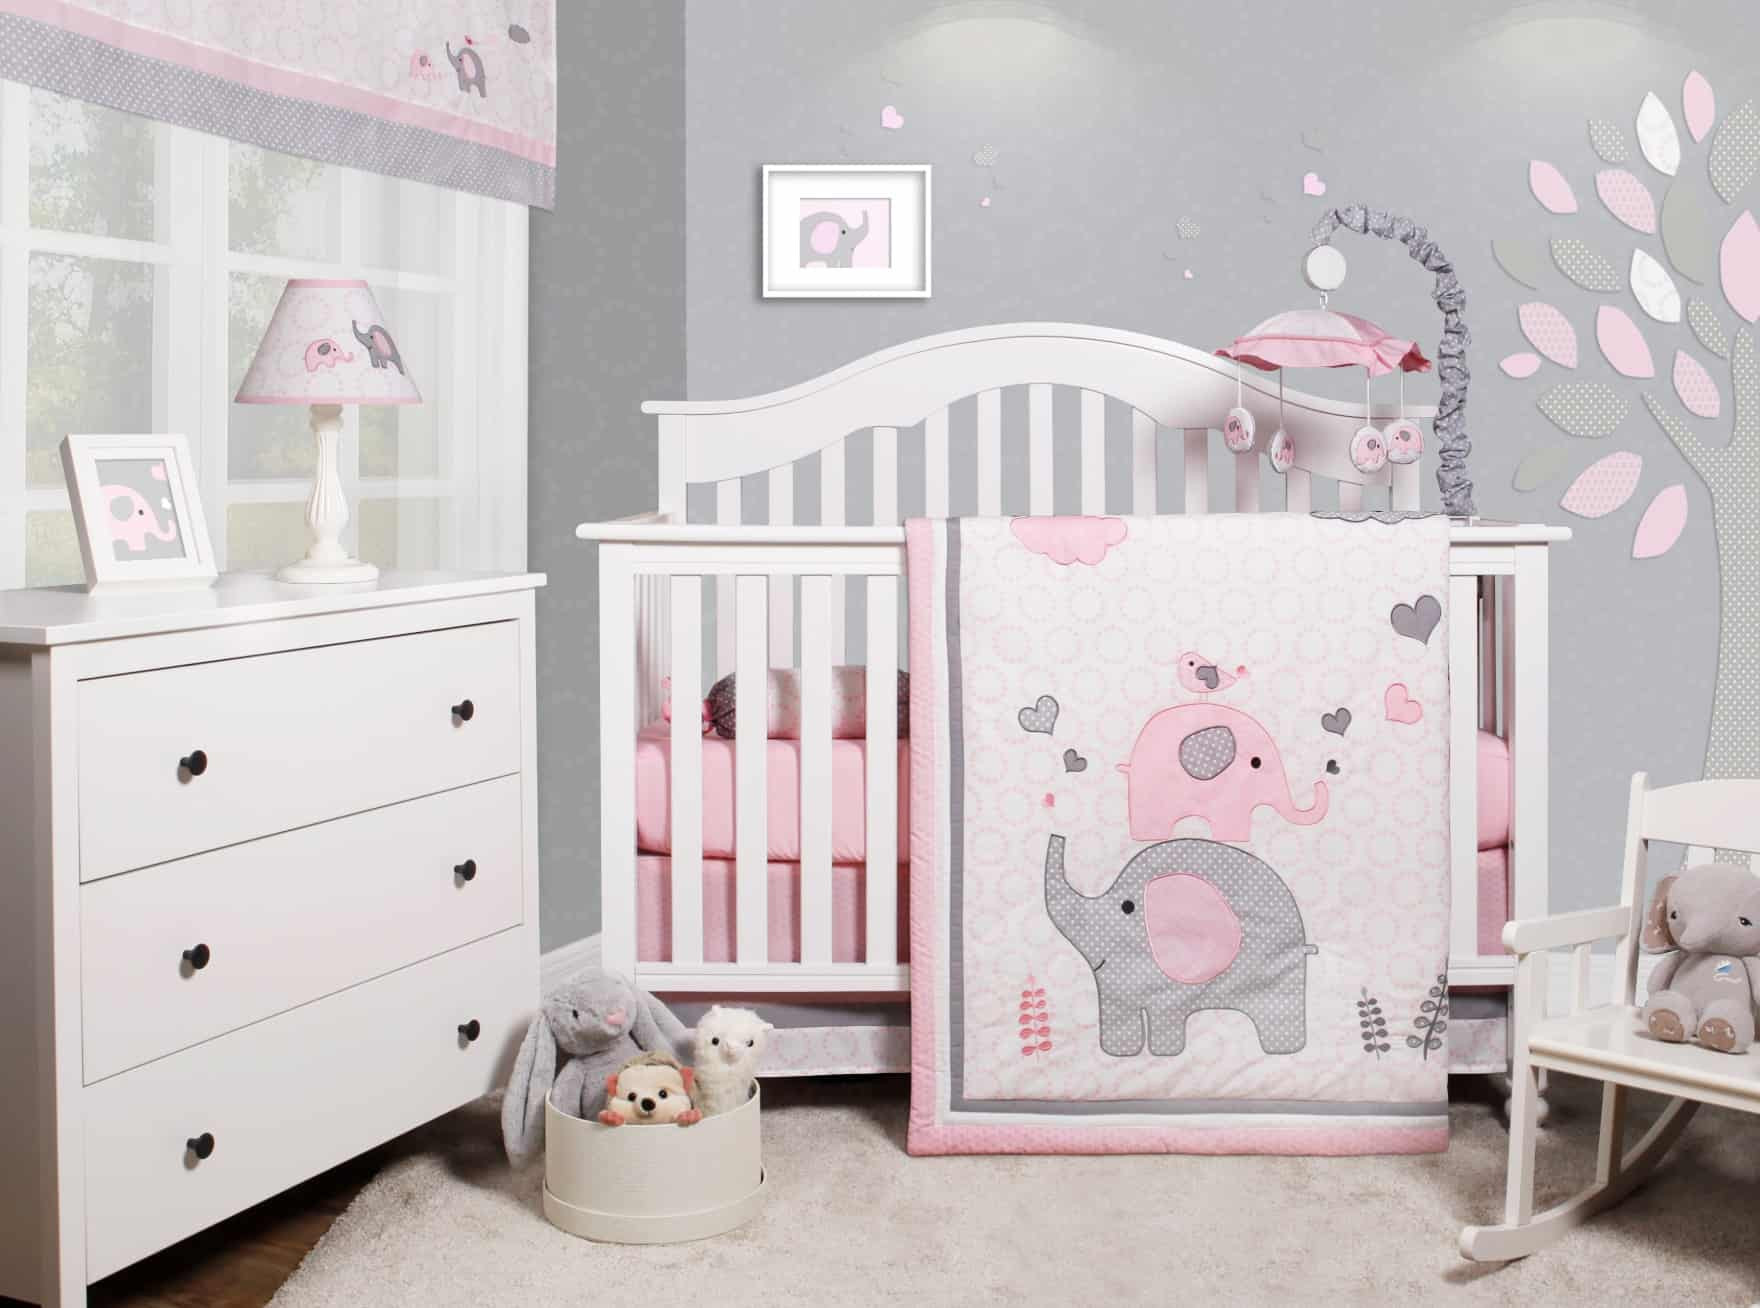 Baby Girl Decorations For Room
 20 Cute Baby Girl Room Ideas